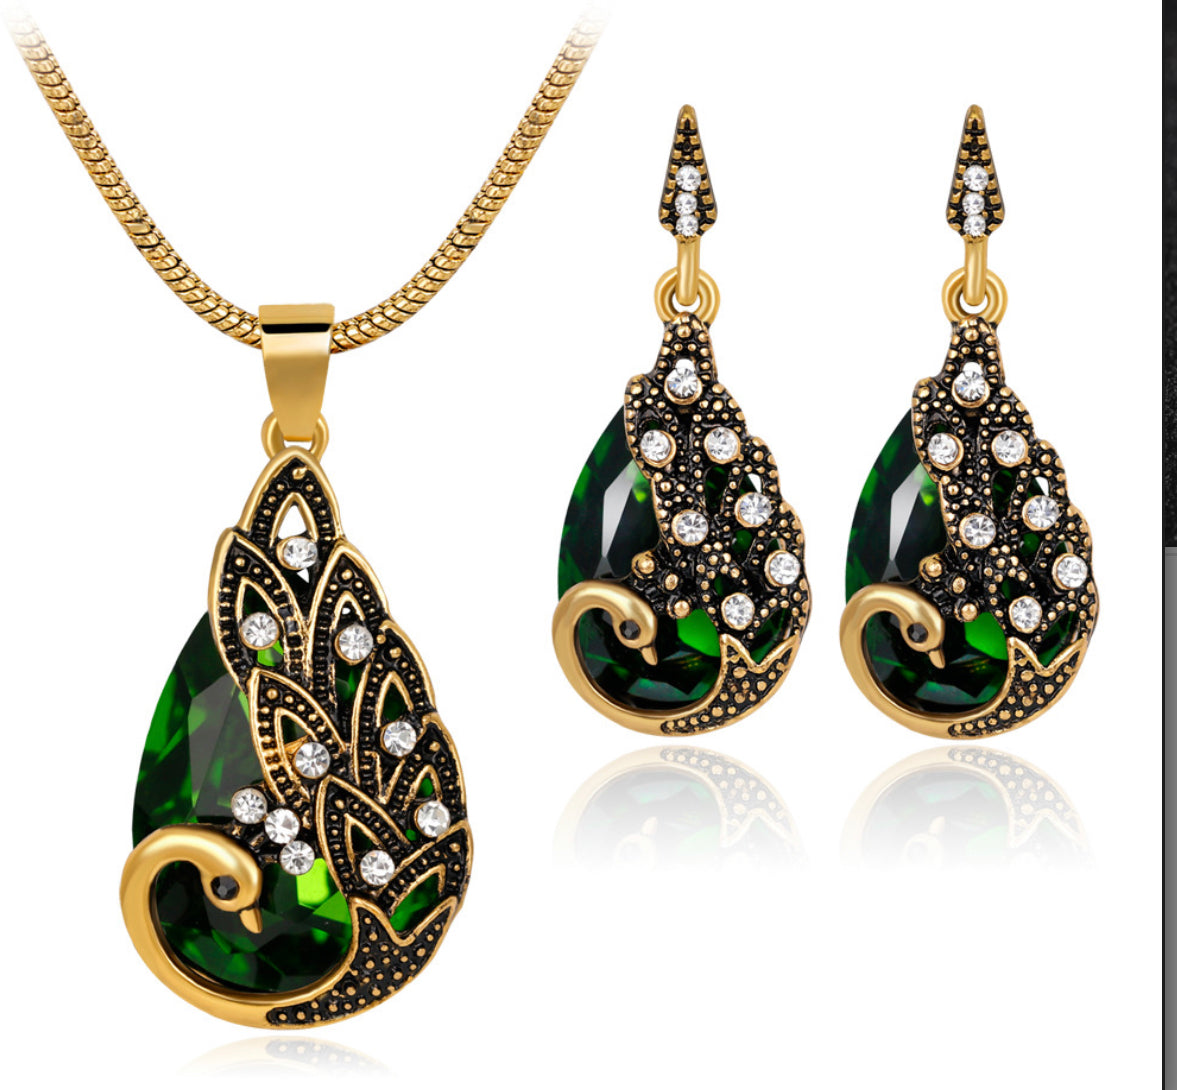 Green peacock crystal rhinestone necklace earrings set 17.7” wedding formal accessory gift bridal shower engagement accessory